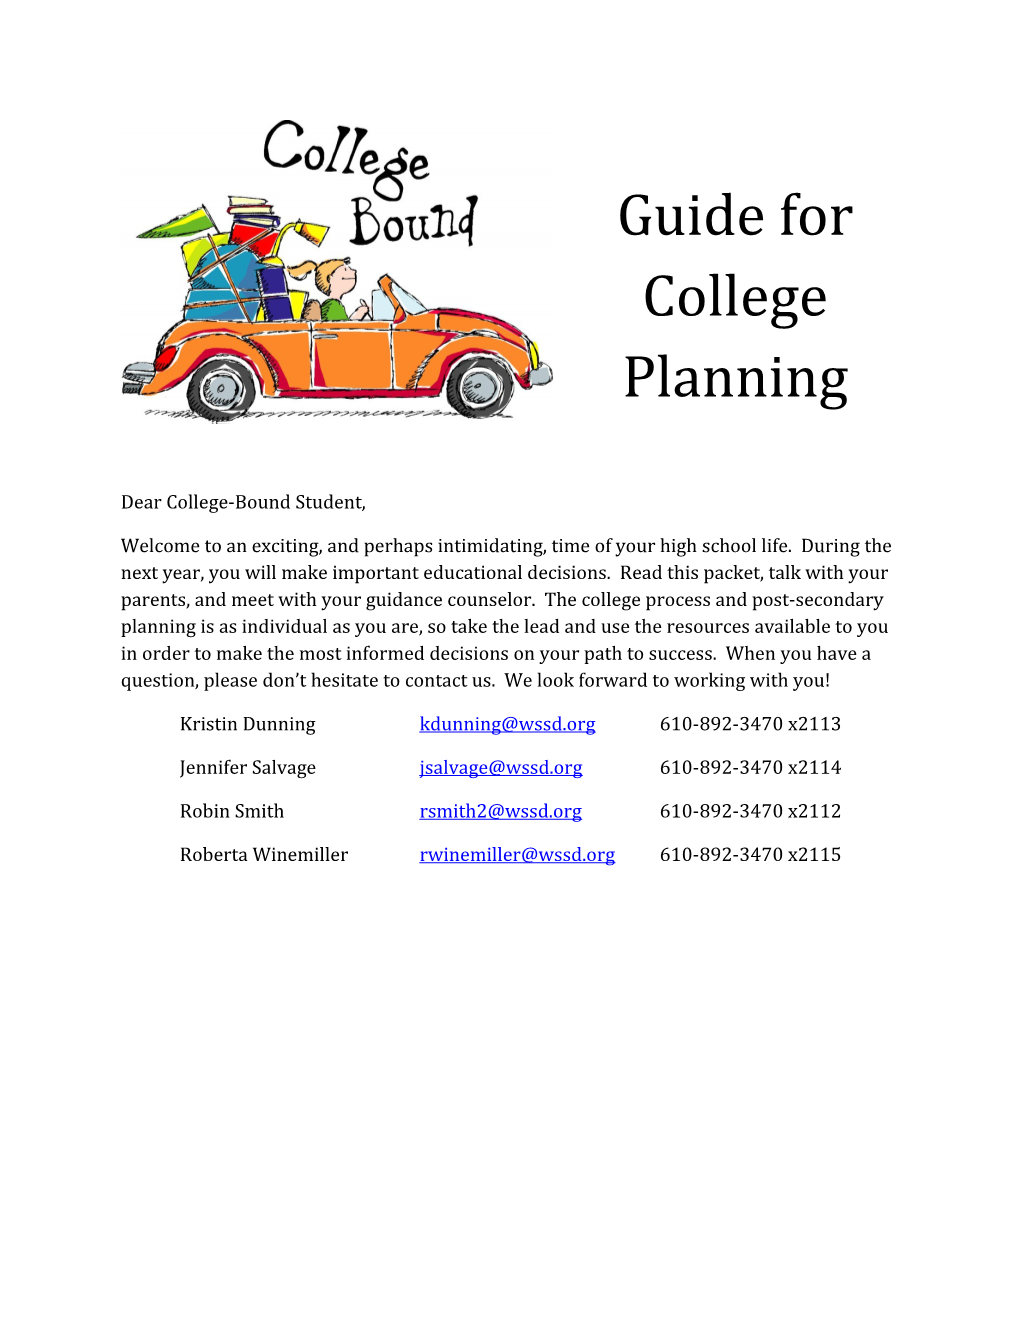 Guide for College Planning